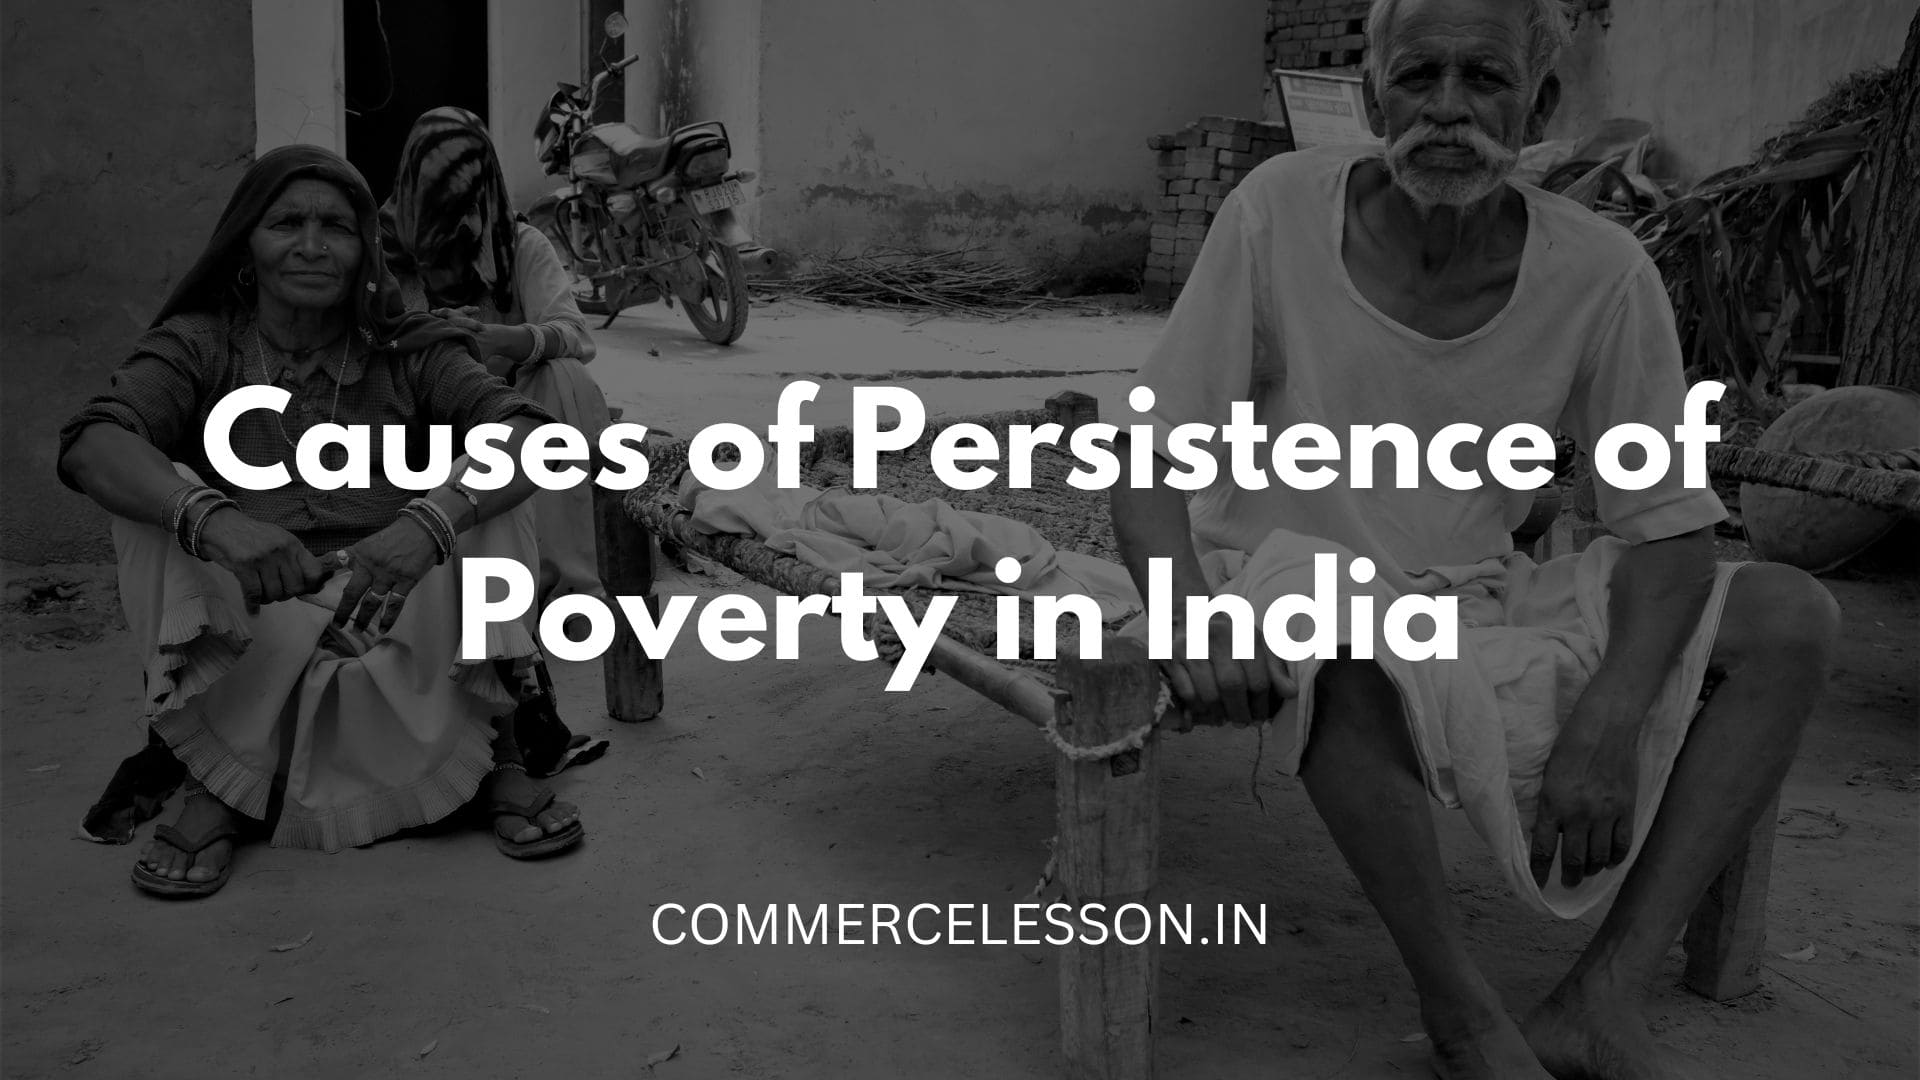 Causes of Persistence of Poverty in India